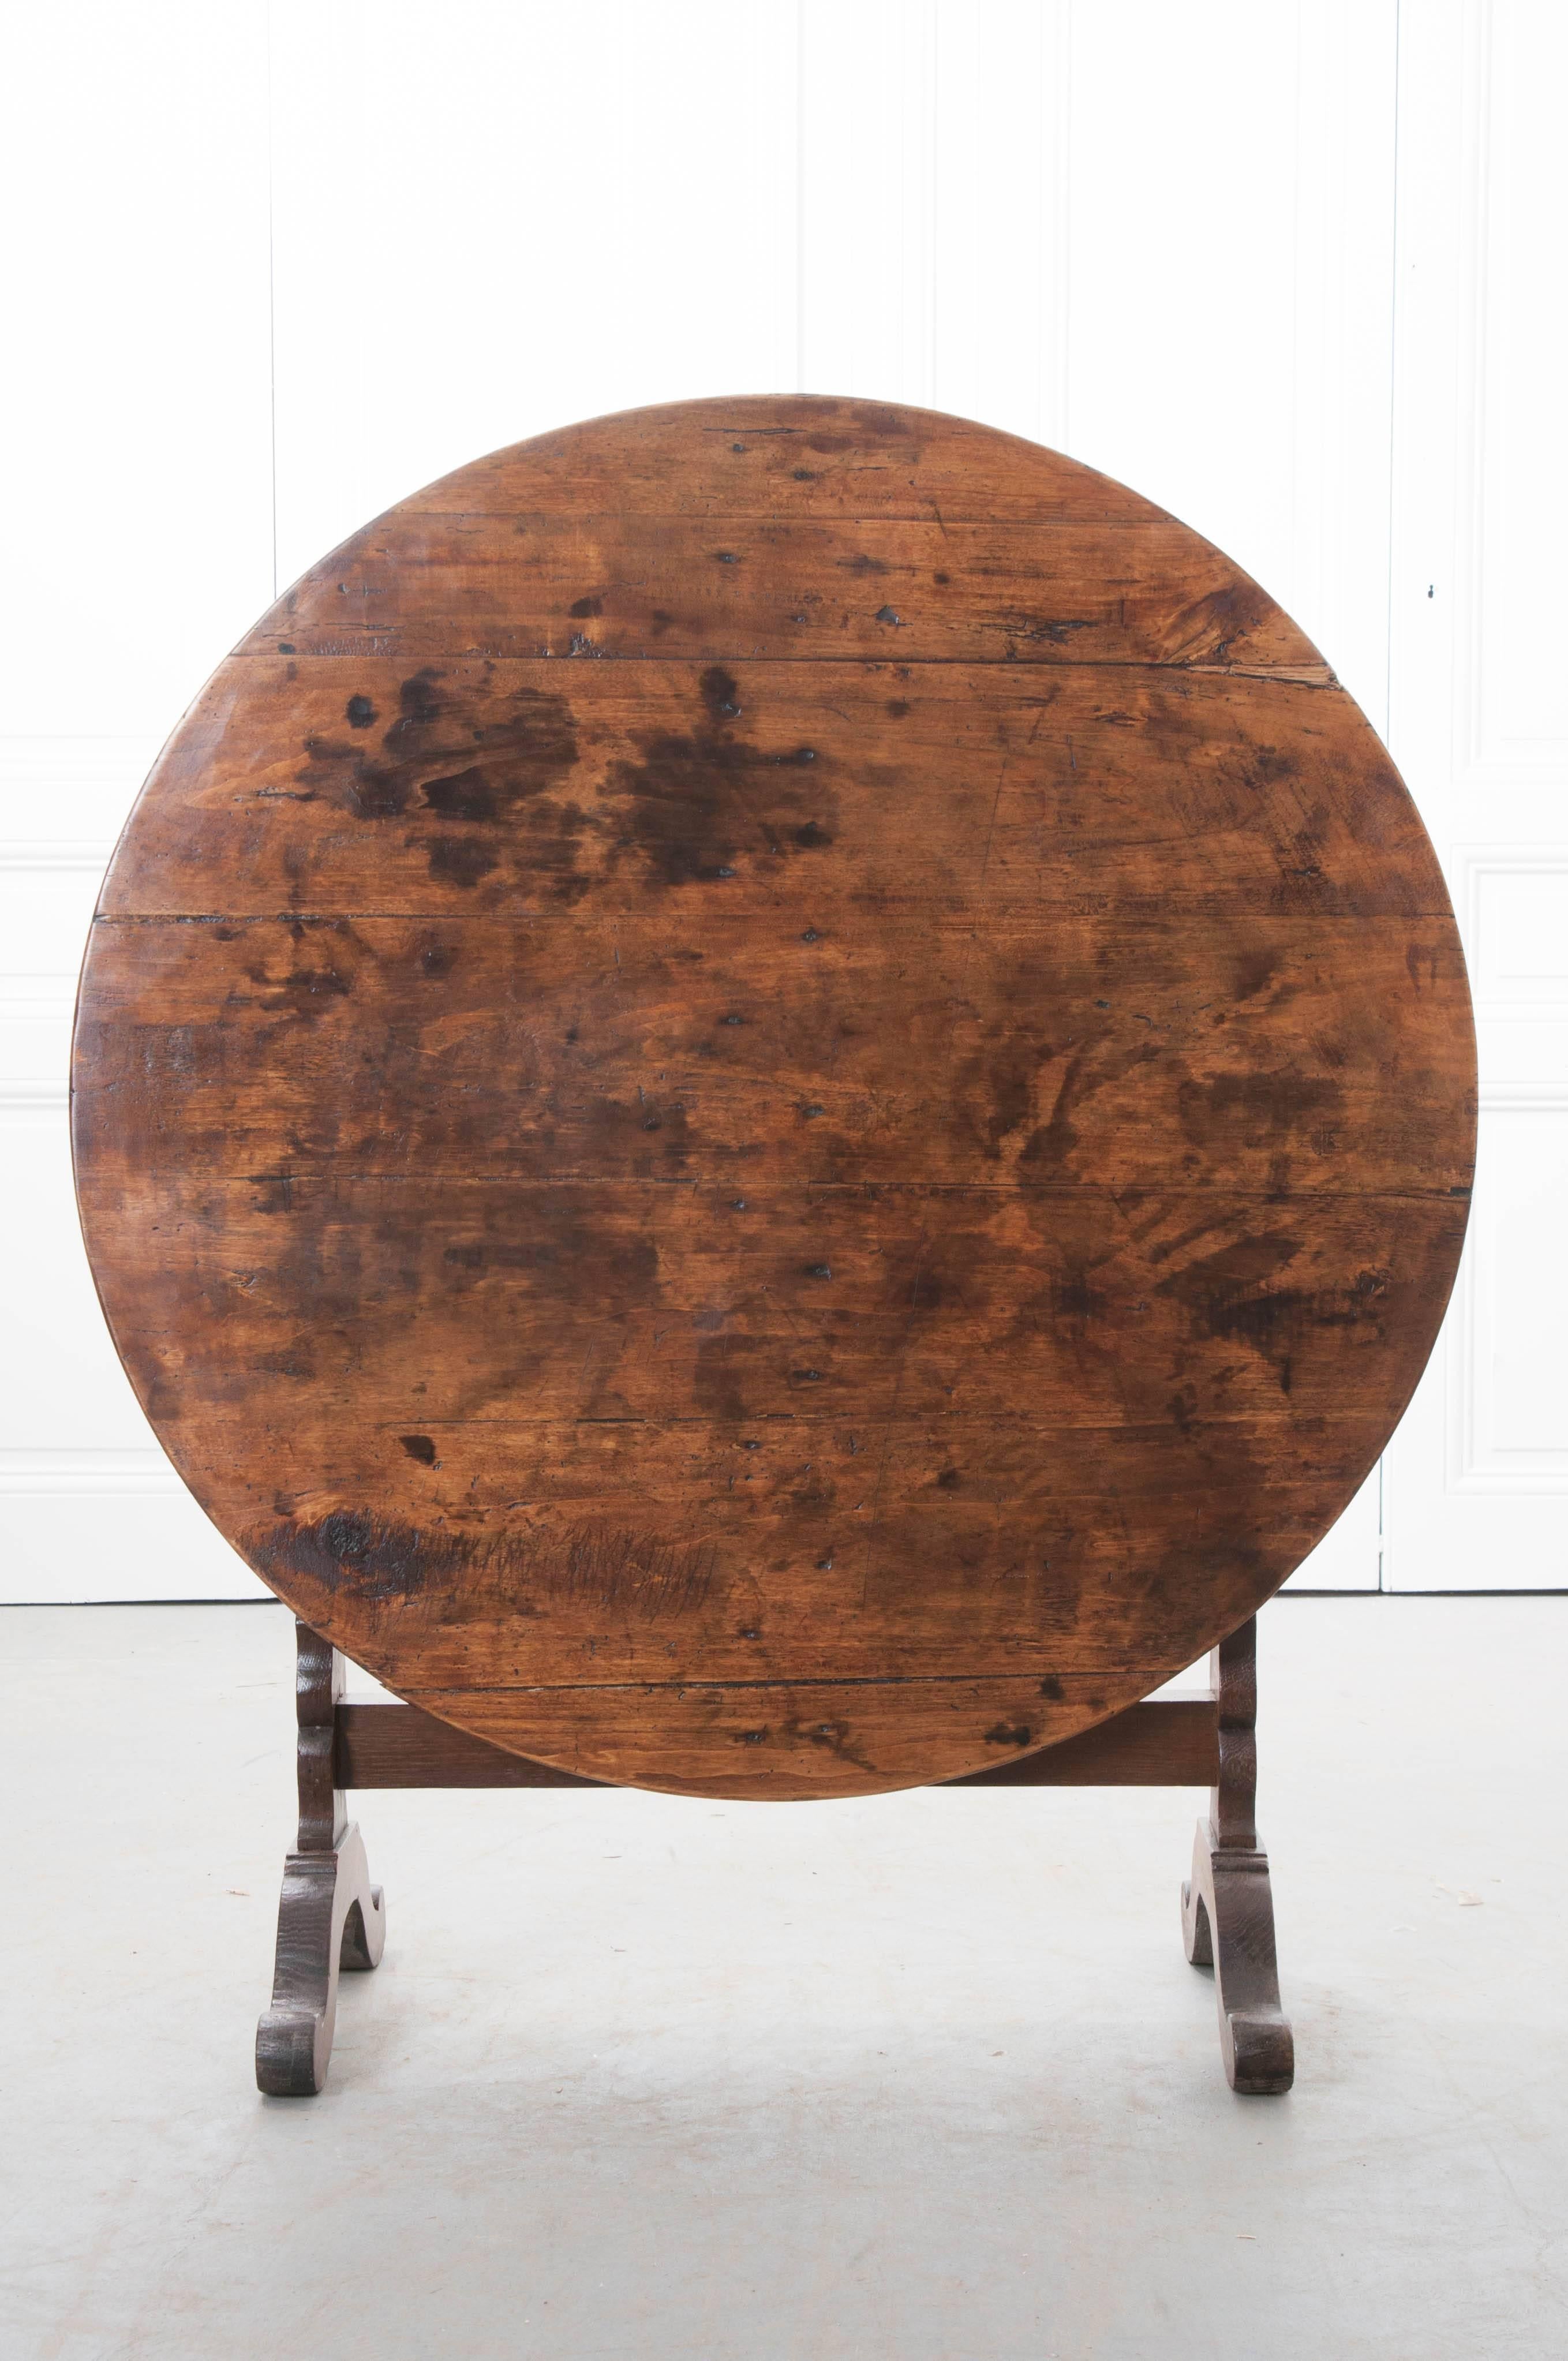 A very special oak and walnut vendange table, also known as a wine taster's table, made in France, circa 1860. The table has a round top, made of walnut, while the styled base is made of oak. This table would have been brought out for tasting wine